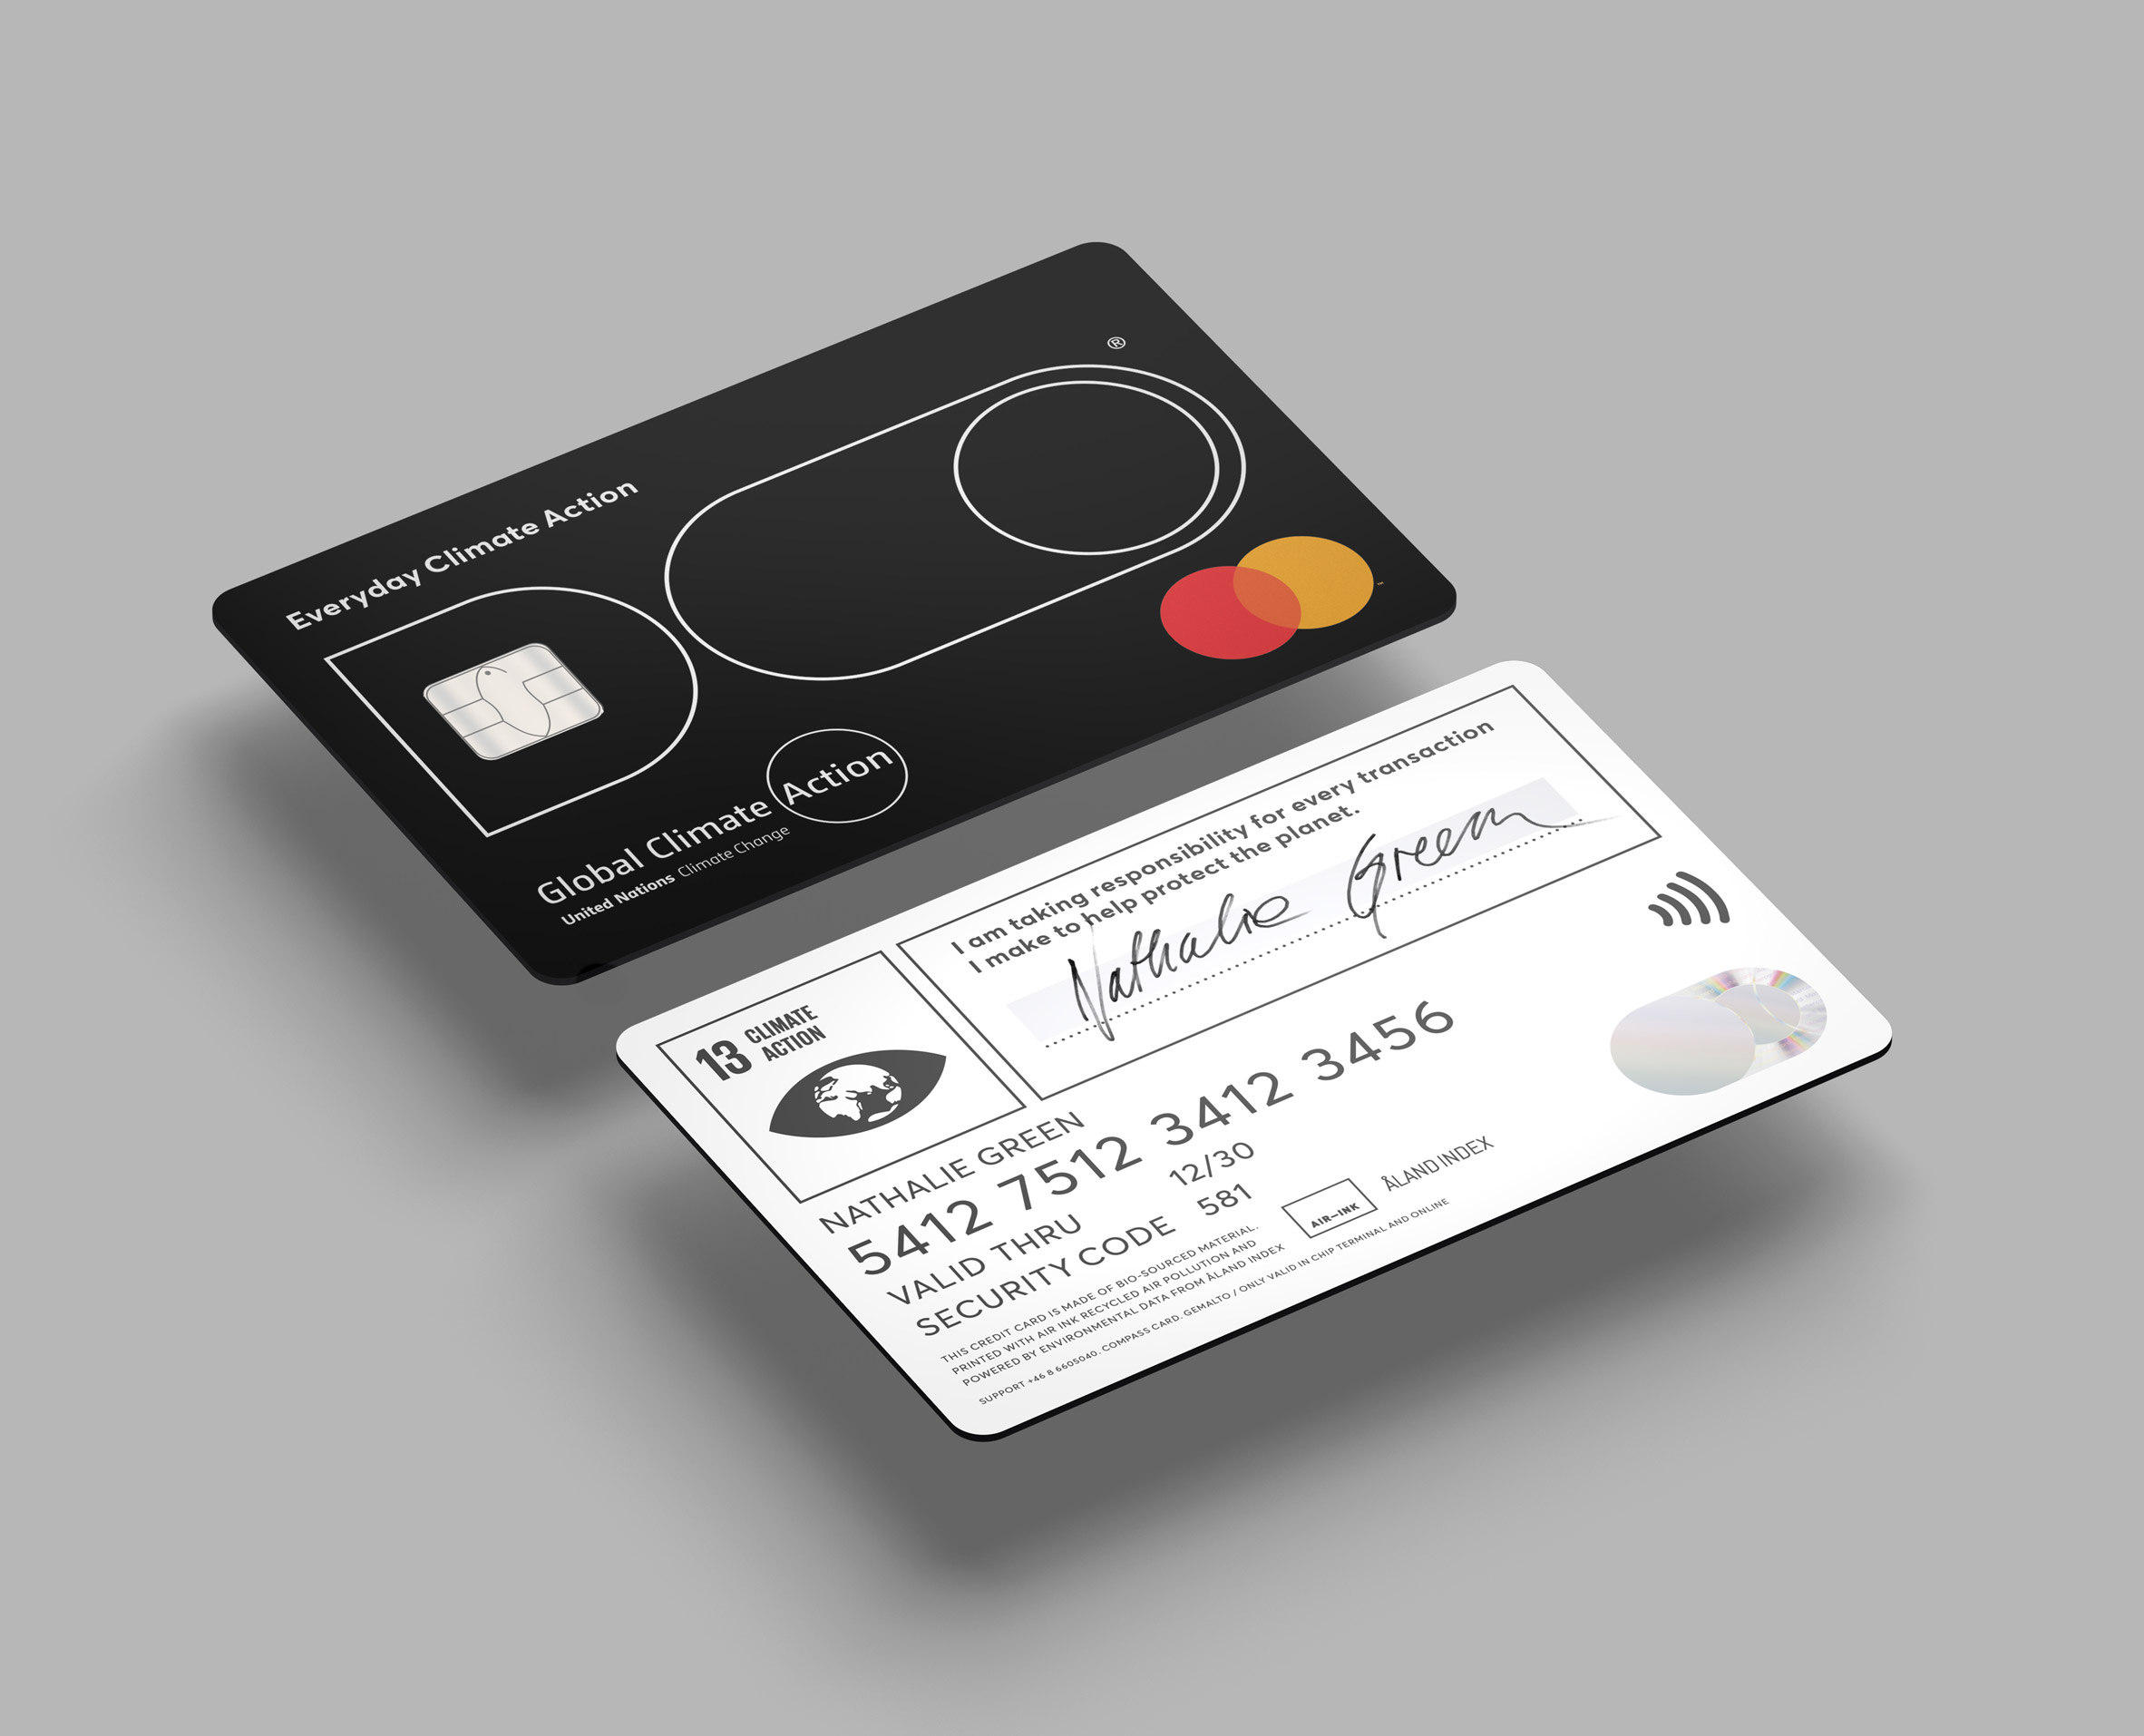 Doconomy climate change credit card